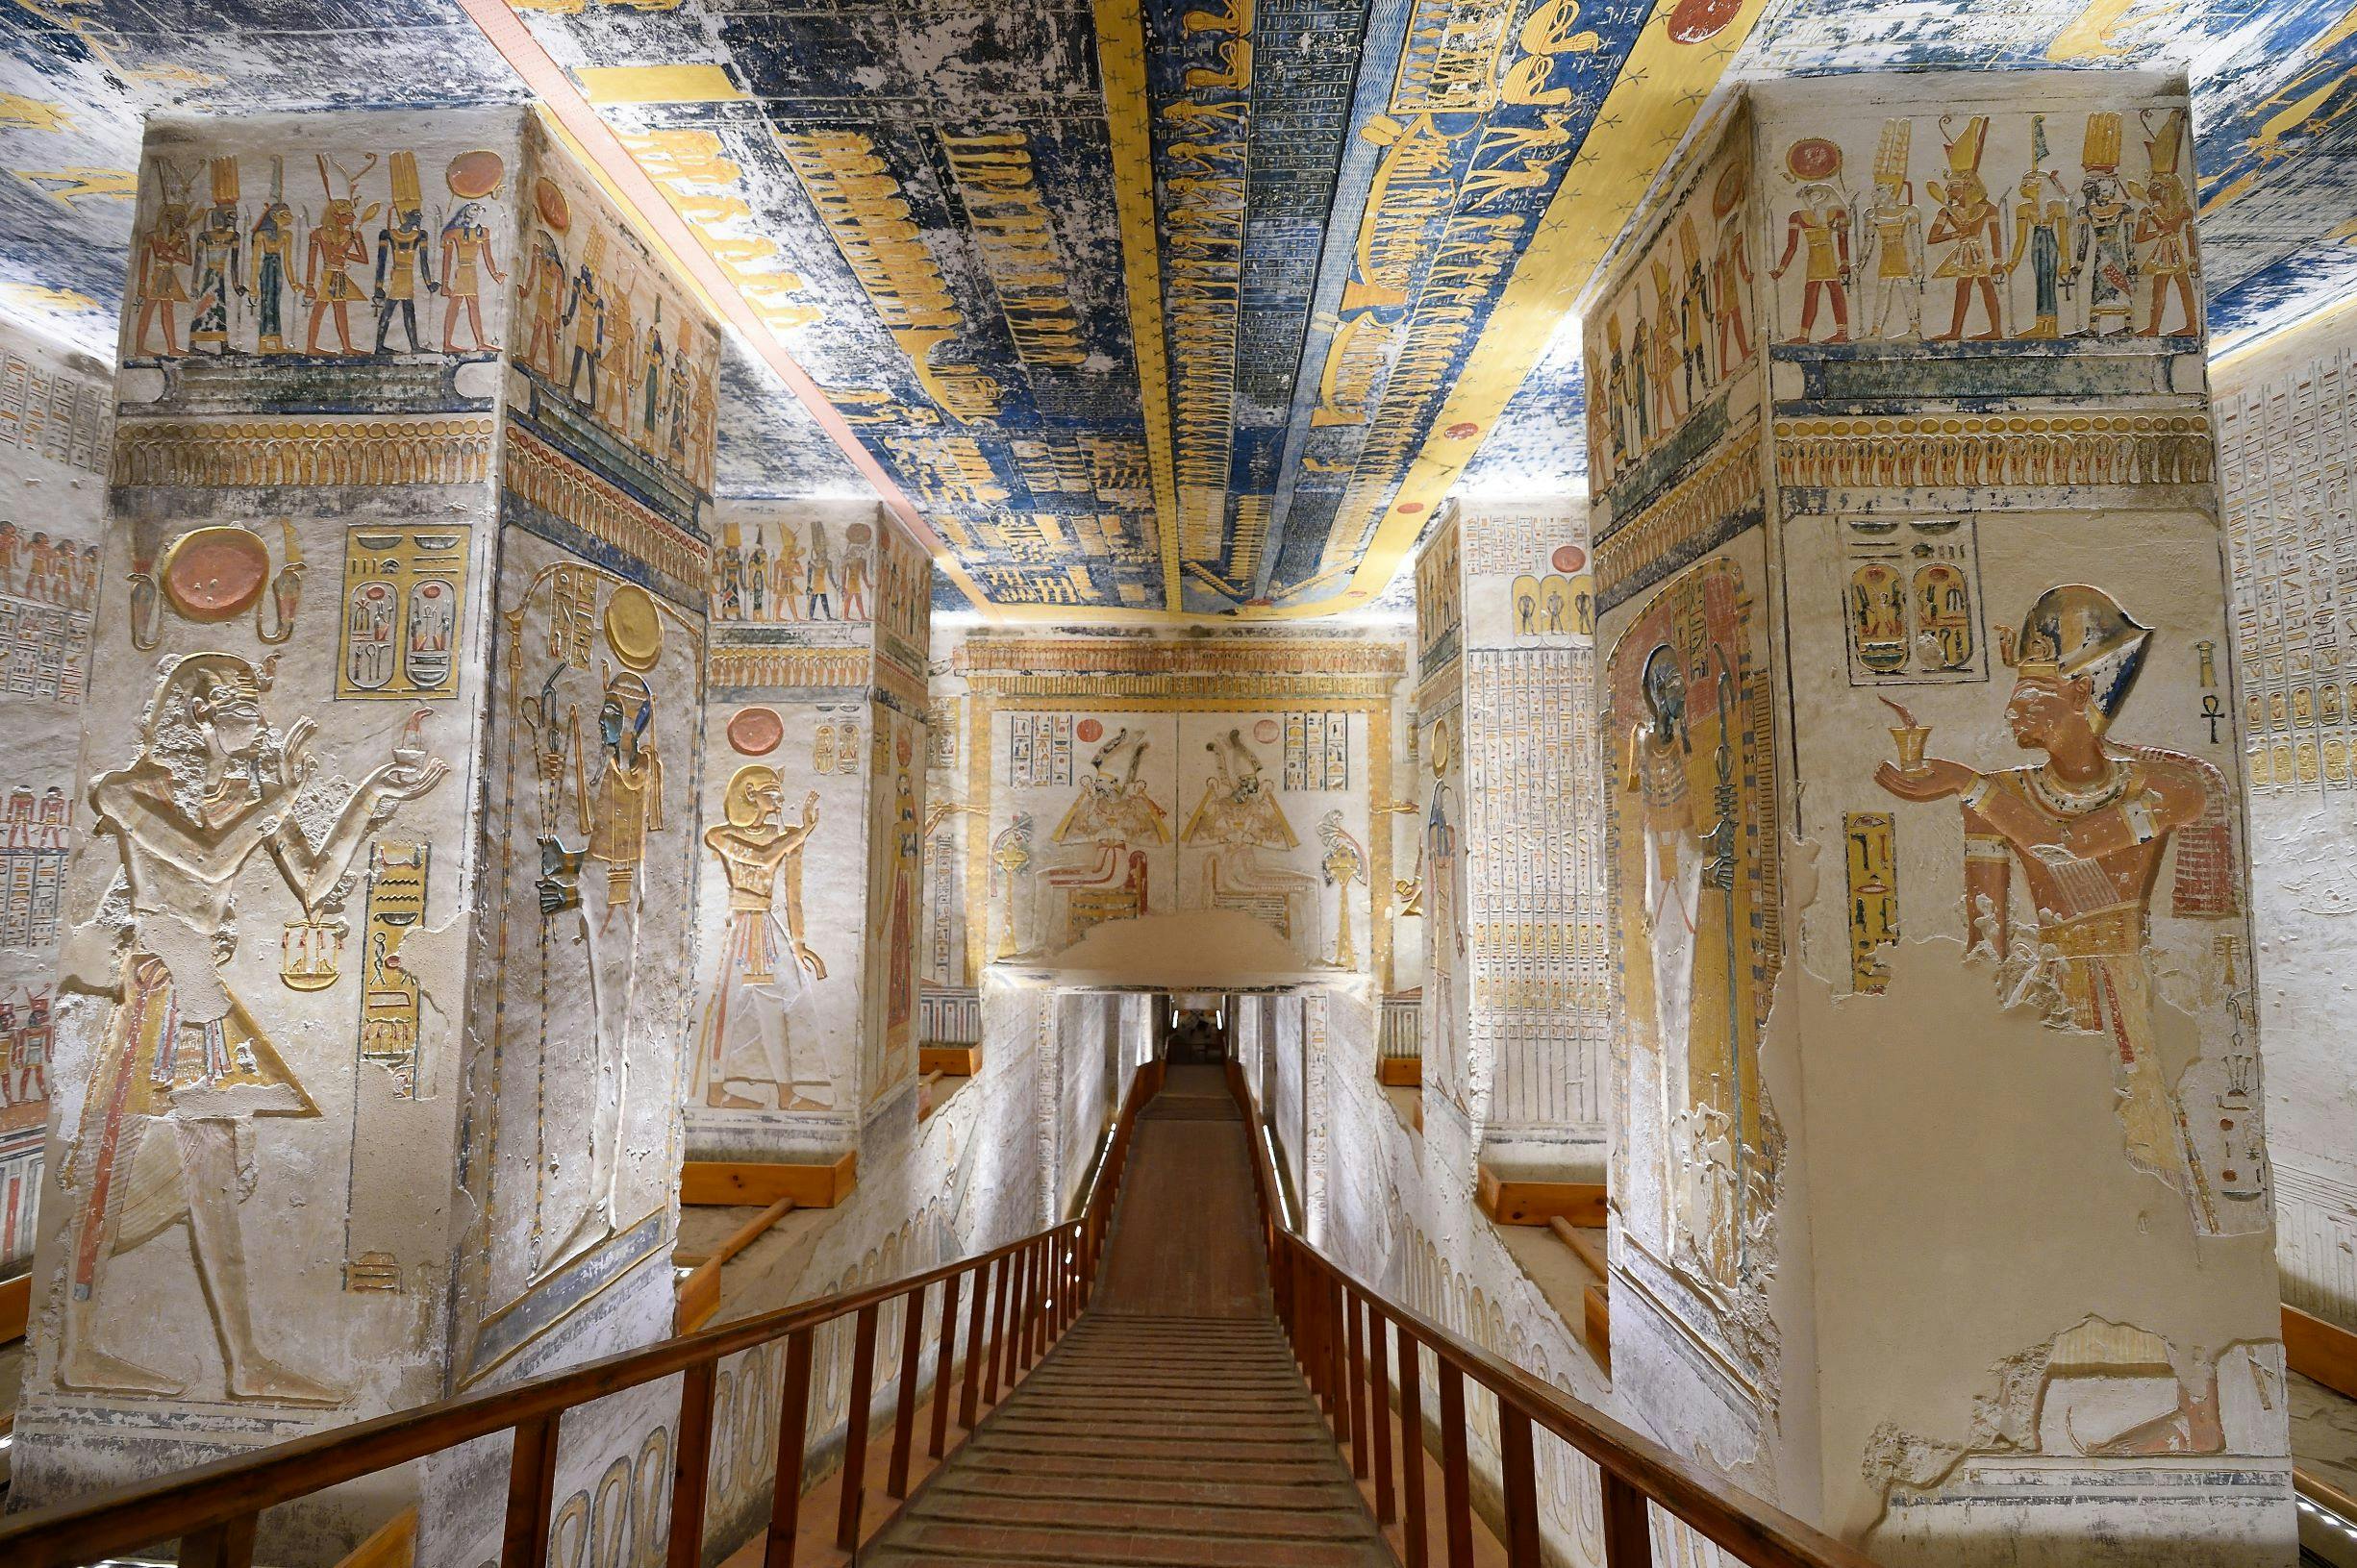 Guided tour to Valley of the Kings and Hatshepsut Temple plus Nile experience